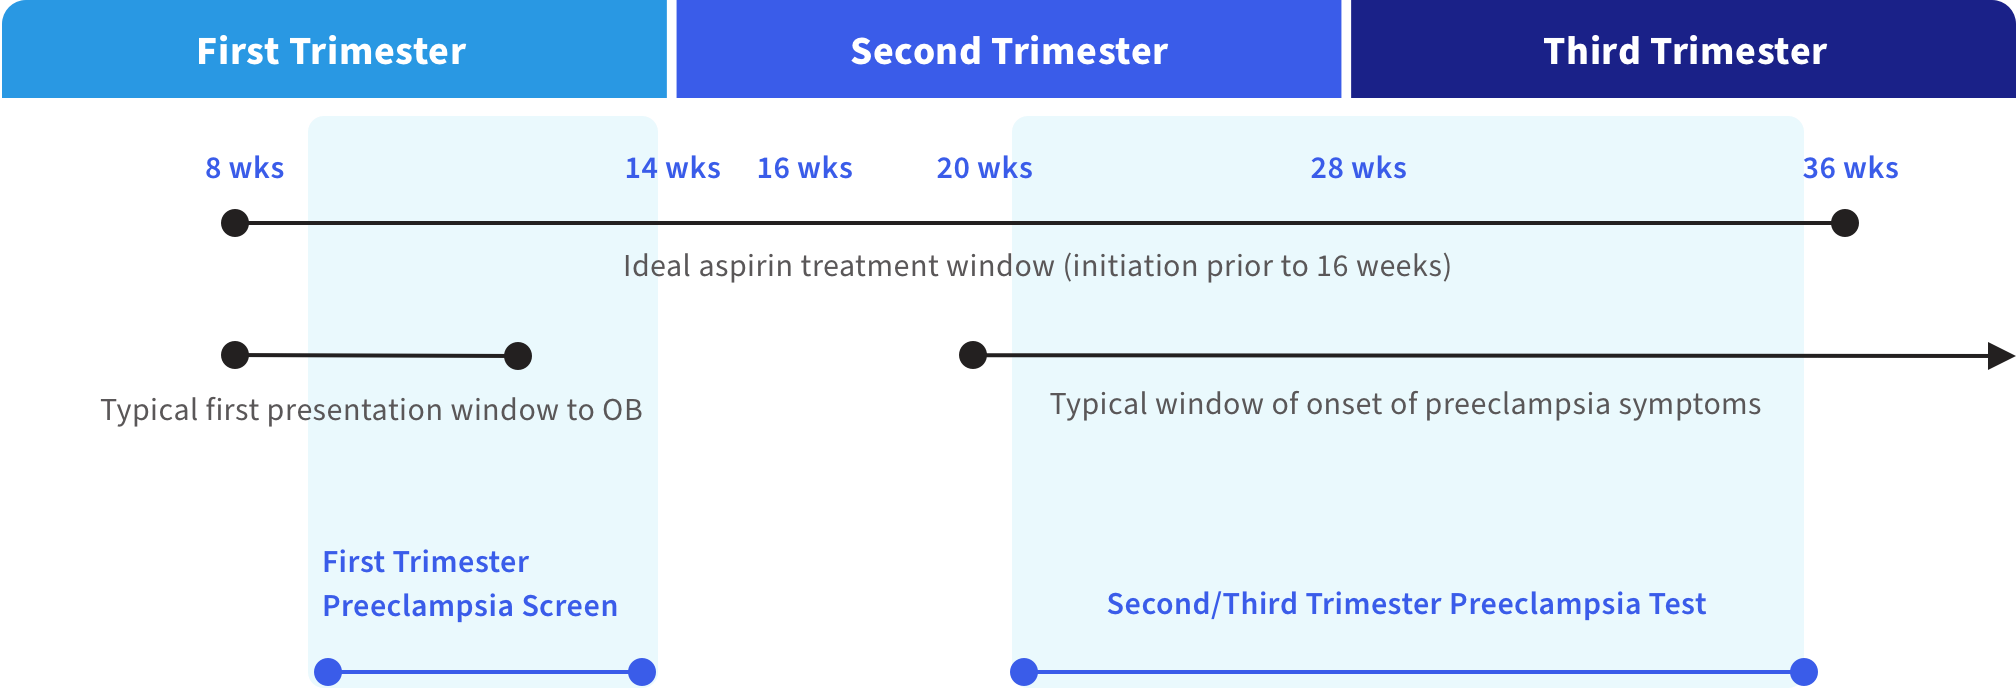 Pregnancy timeline chart showing: 1st Trimester Preeclampsia Screen & Preeclampsia PLUS during 11-14 weeks gestation; Ideal aspirin treatment window prior to 16 weeks to 36 weeks; Between weeks 23 and 35 add a new test; 2nd/3rd Trimester Preeclampsia Test